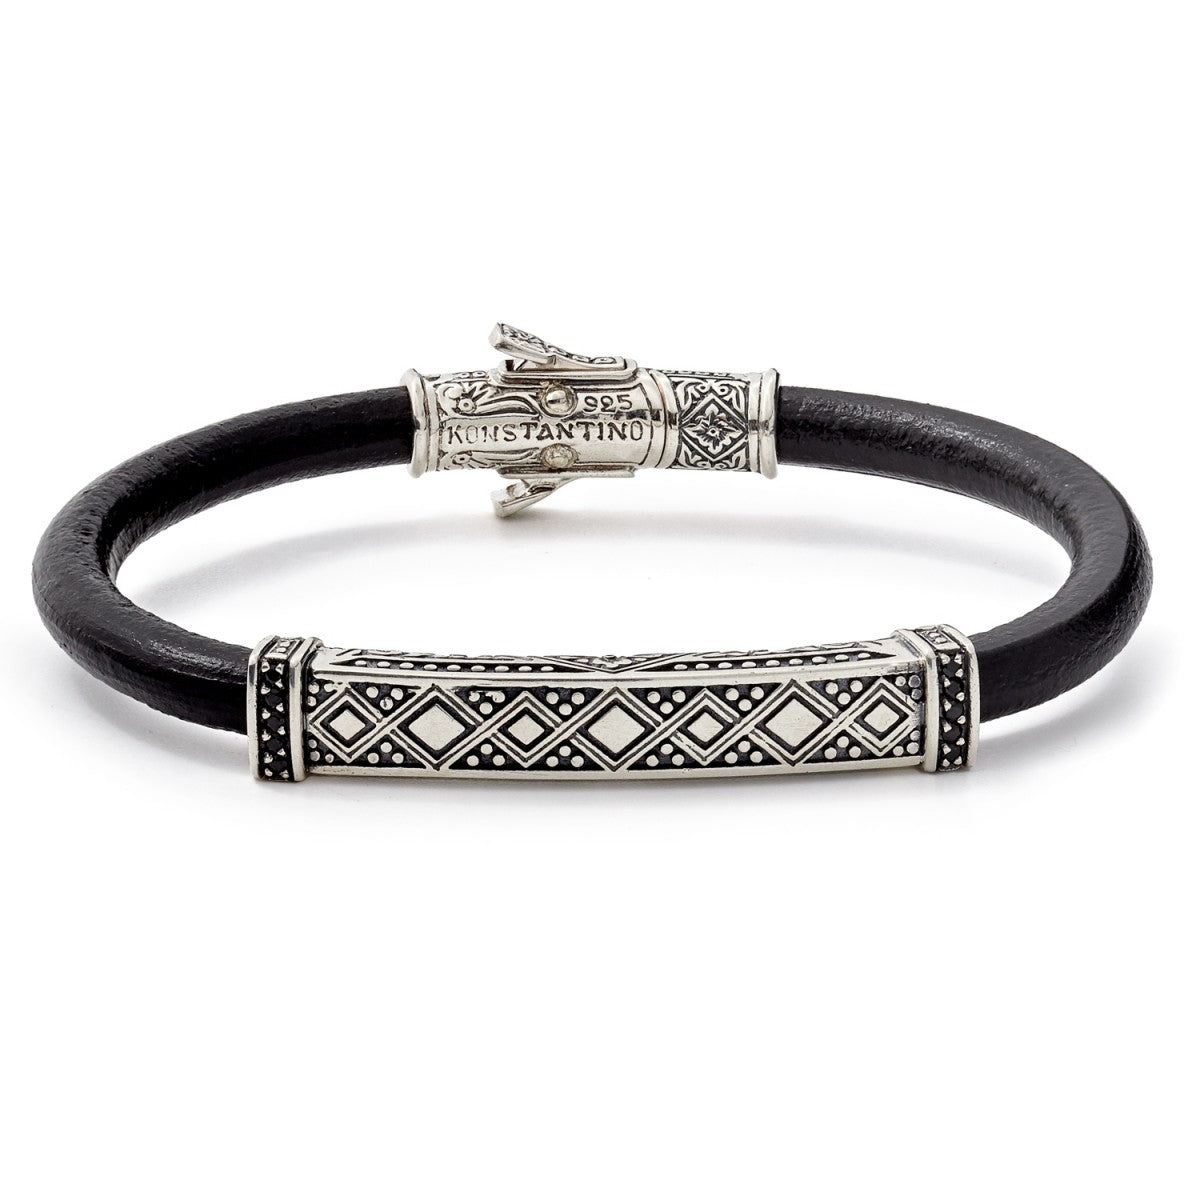 Konstantino Men's Black Leather Bracelet With Sterling Silver and Black Spinel Stone Accents, 8 Inch